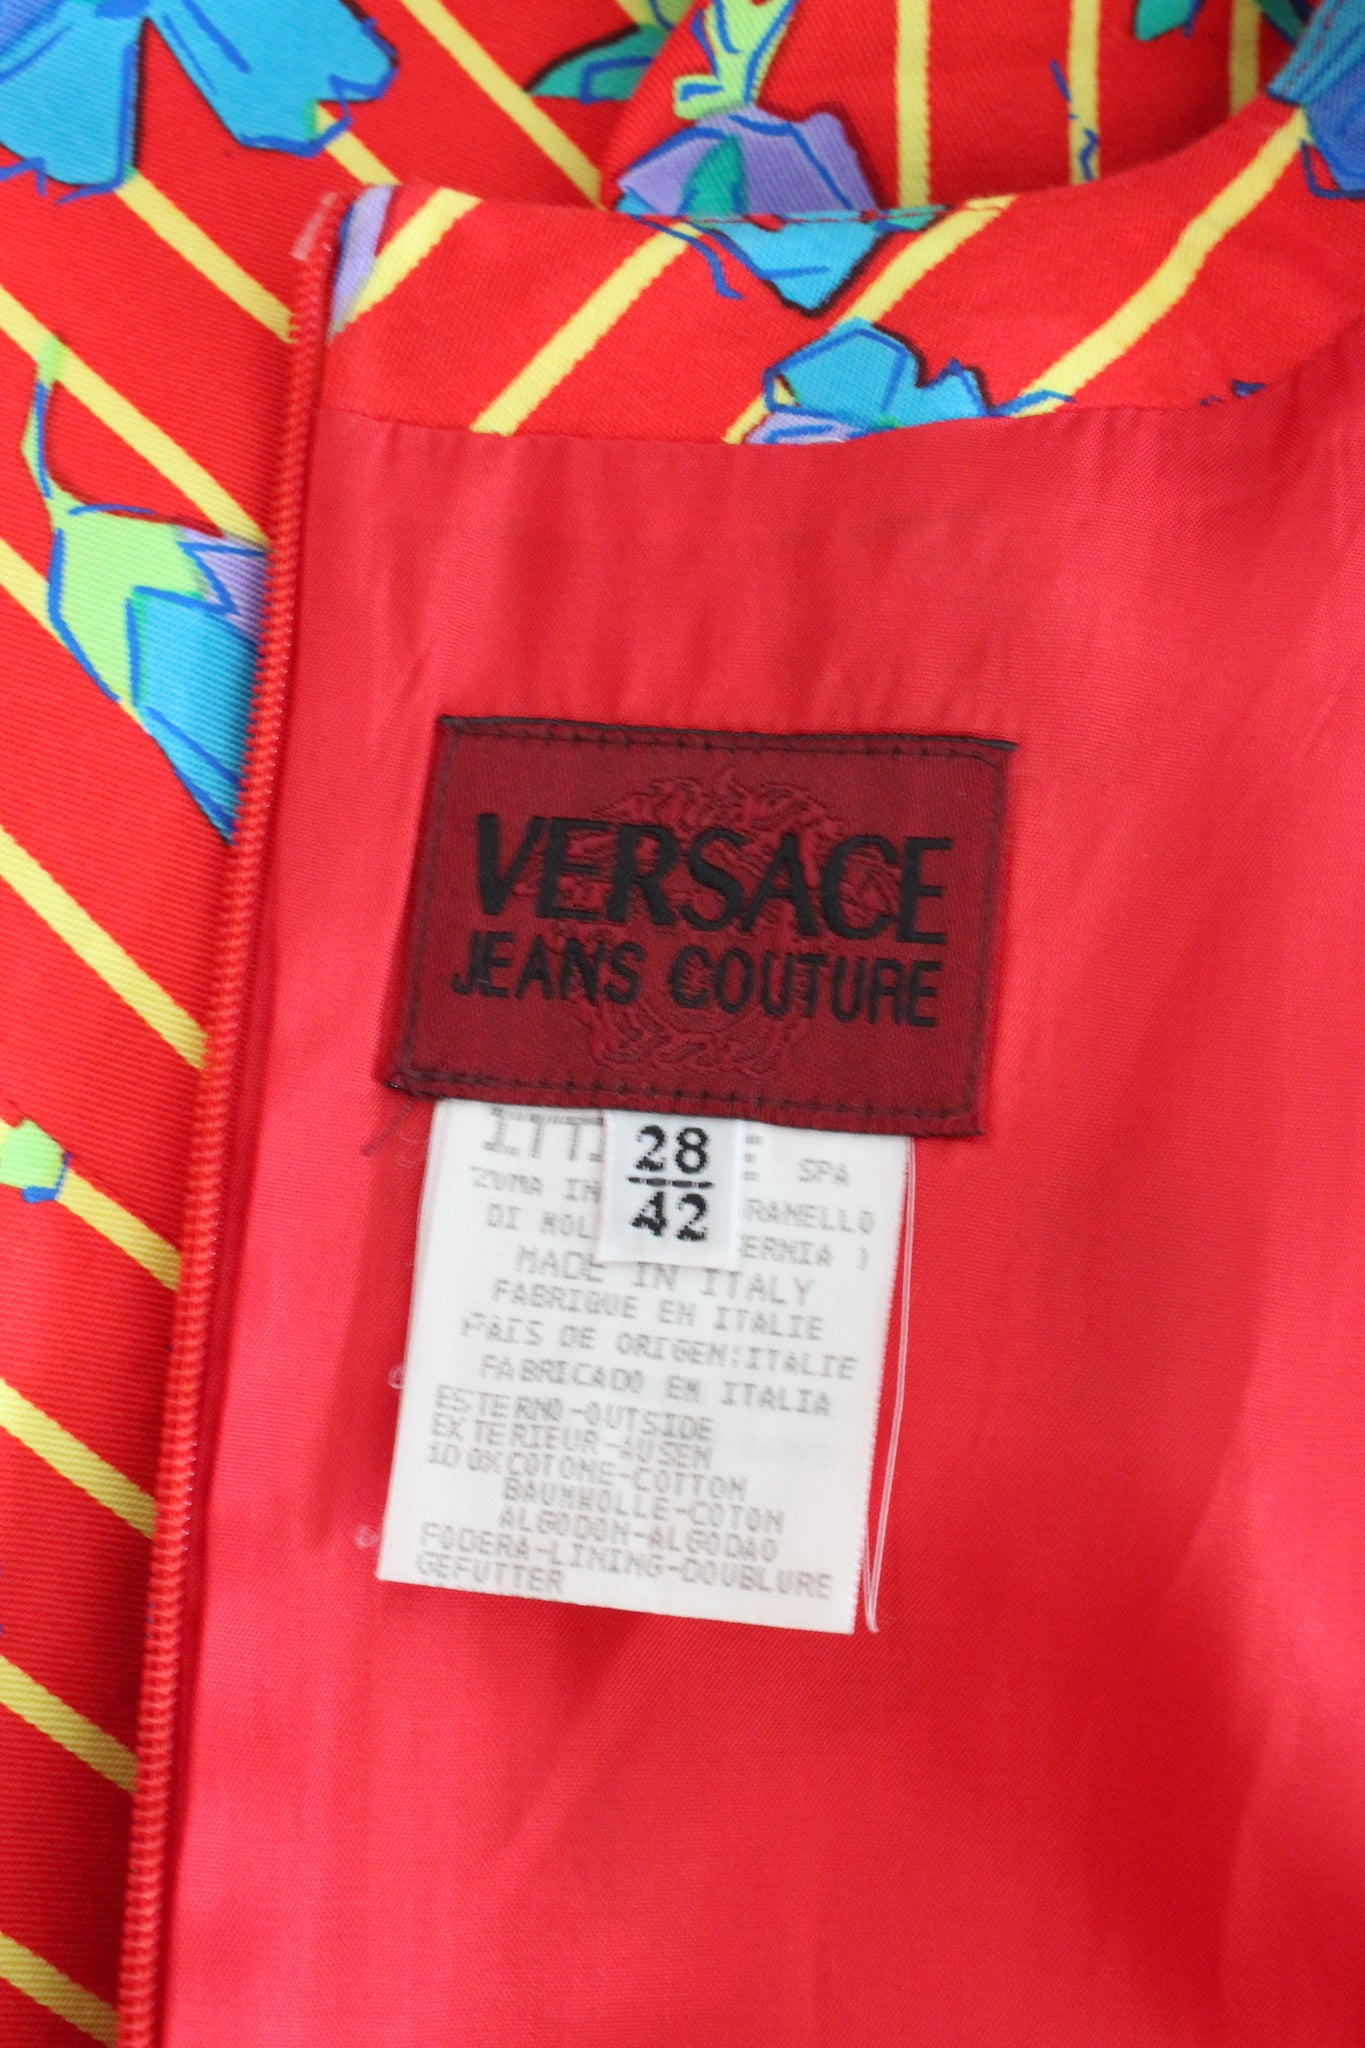 Versace Jeans Couture - Made in Italy Fashion